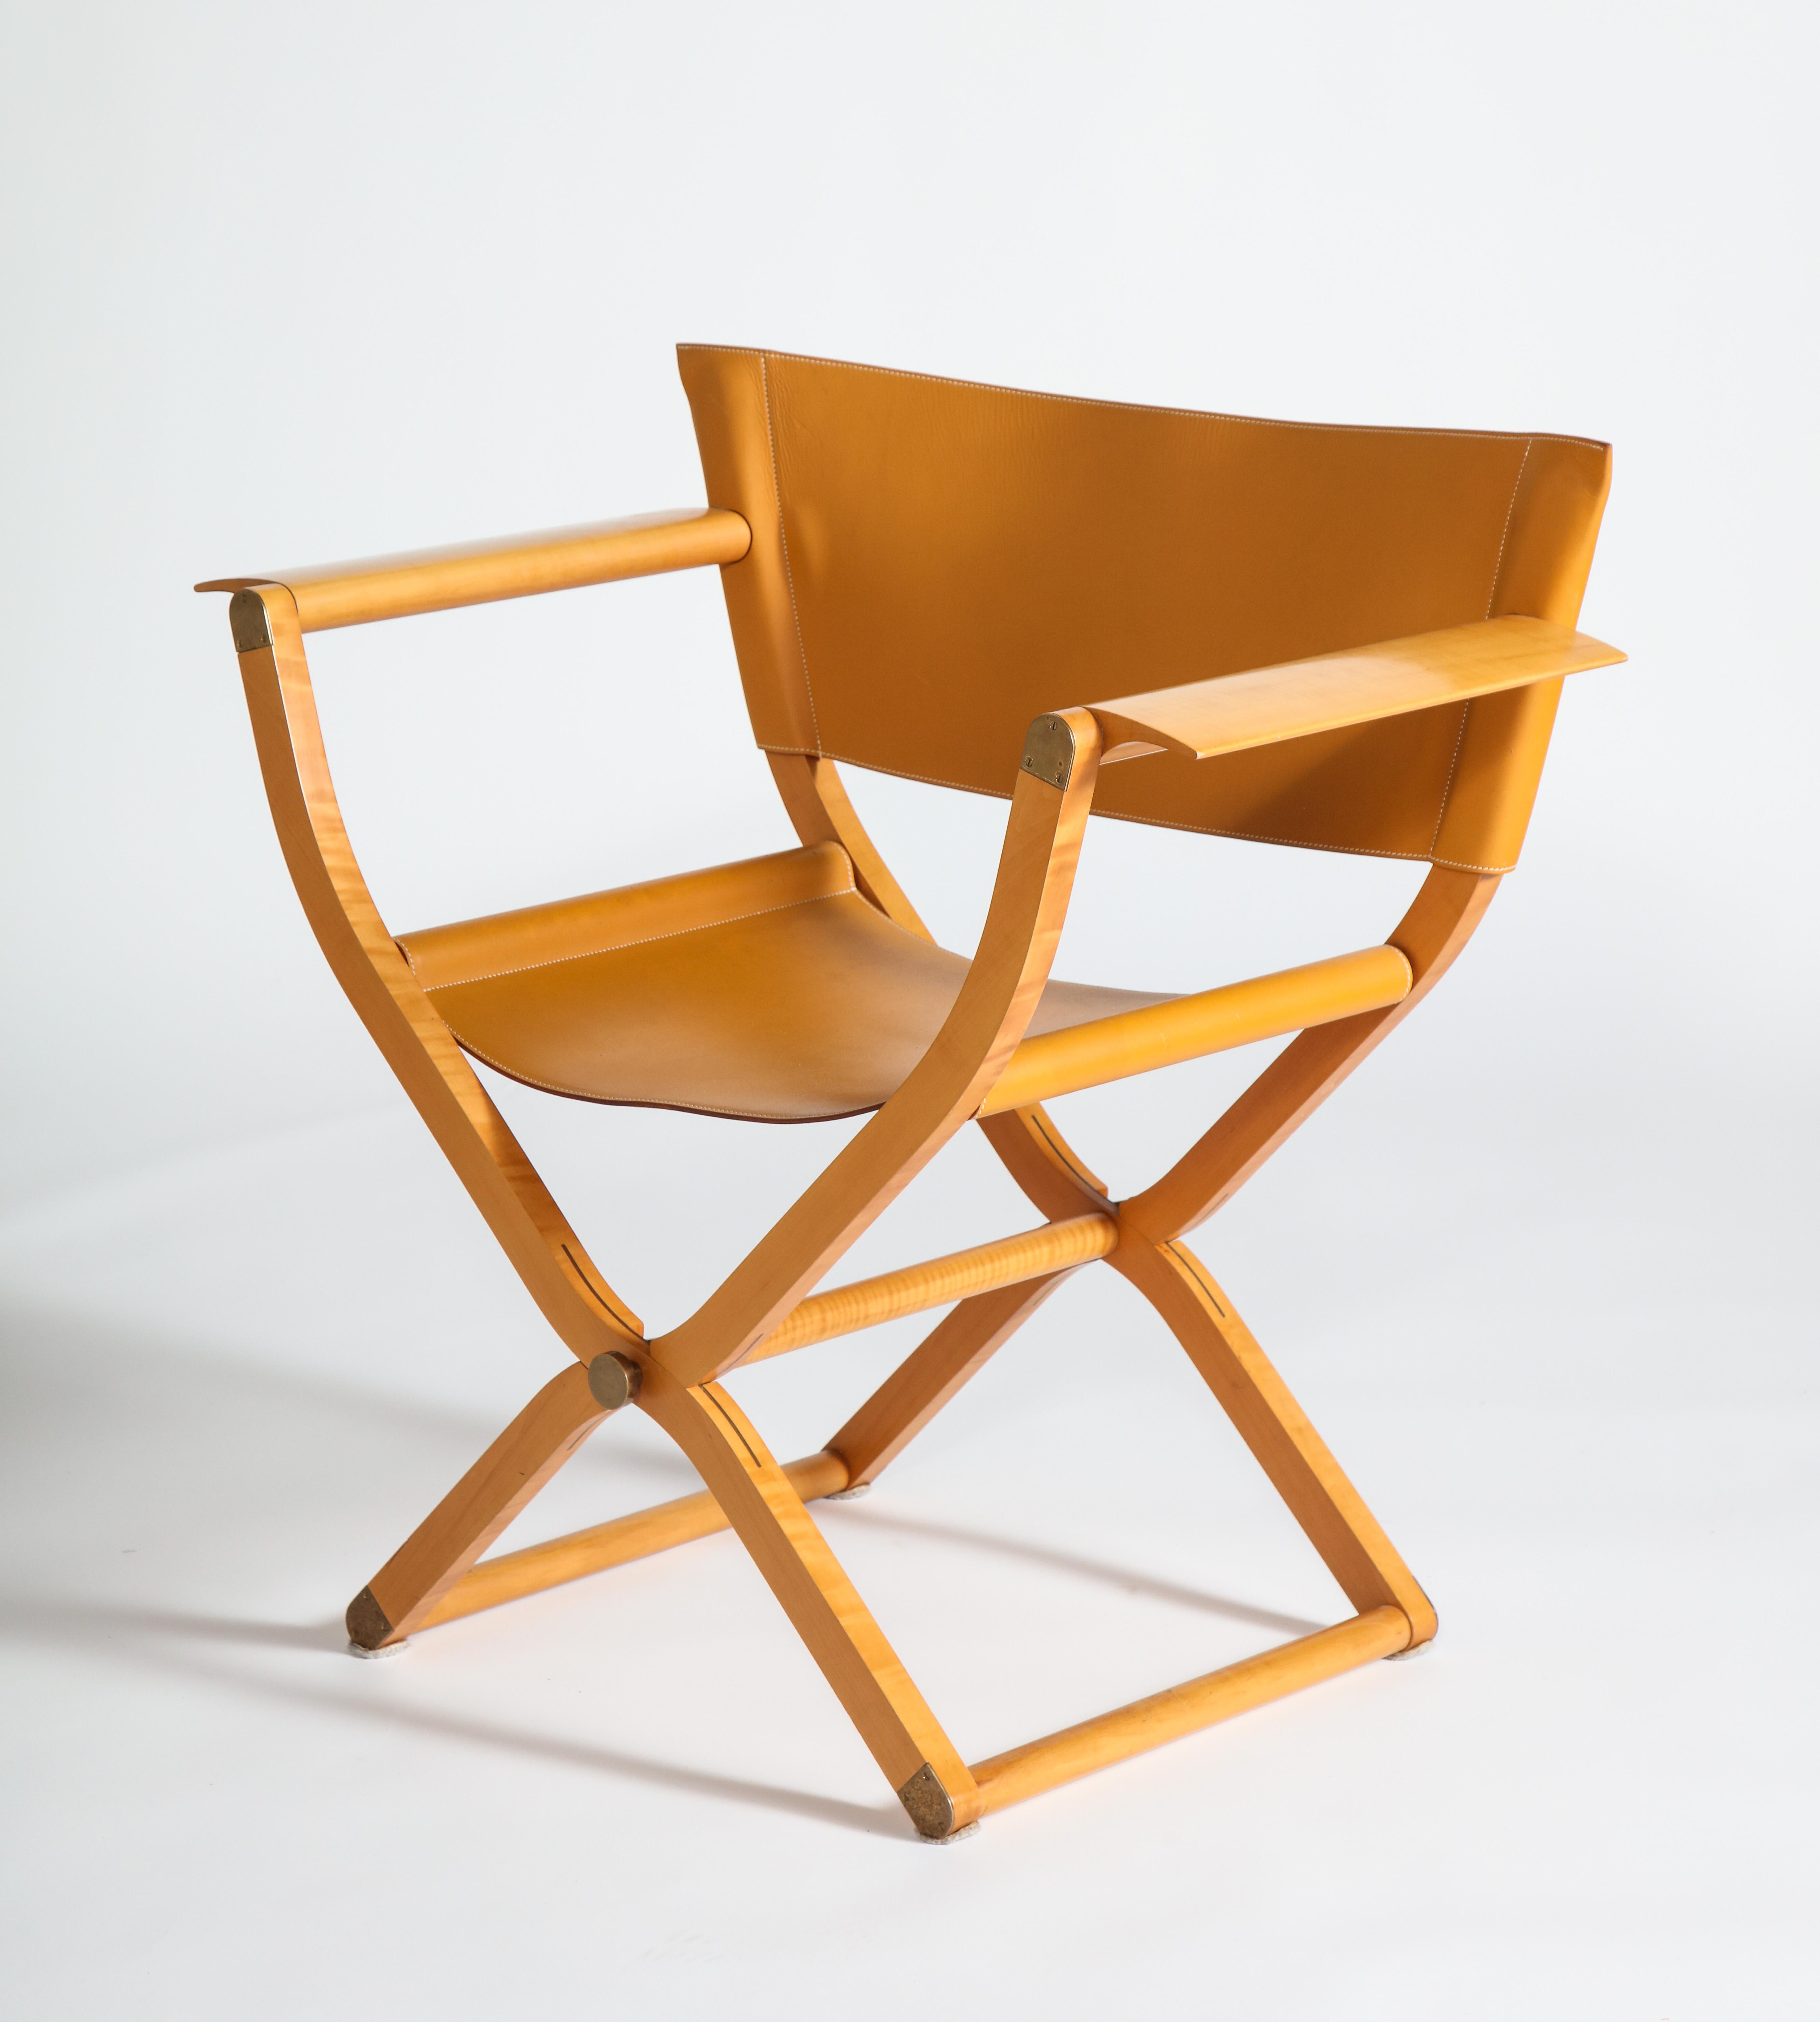 Hermés Pippa folding armchair

Hermés in collaboration with Rena Dumas and Peter Coles

Folding armchair with leather finishing. Pearwood and natural cowhide.